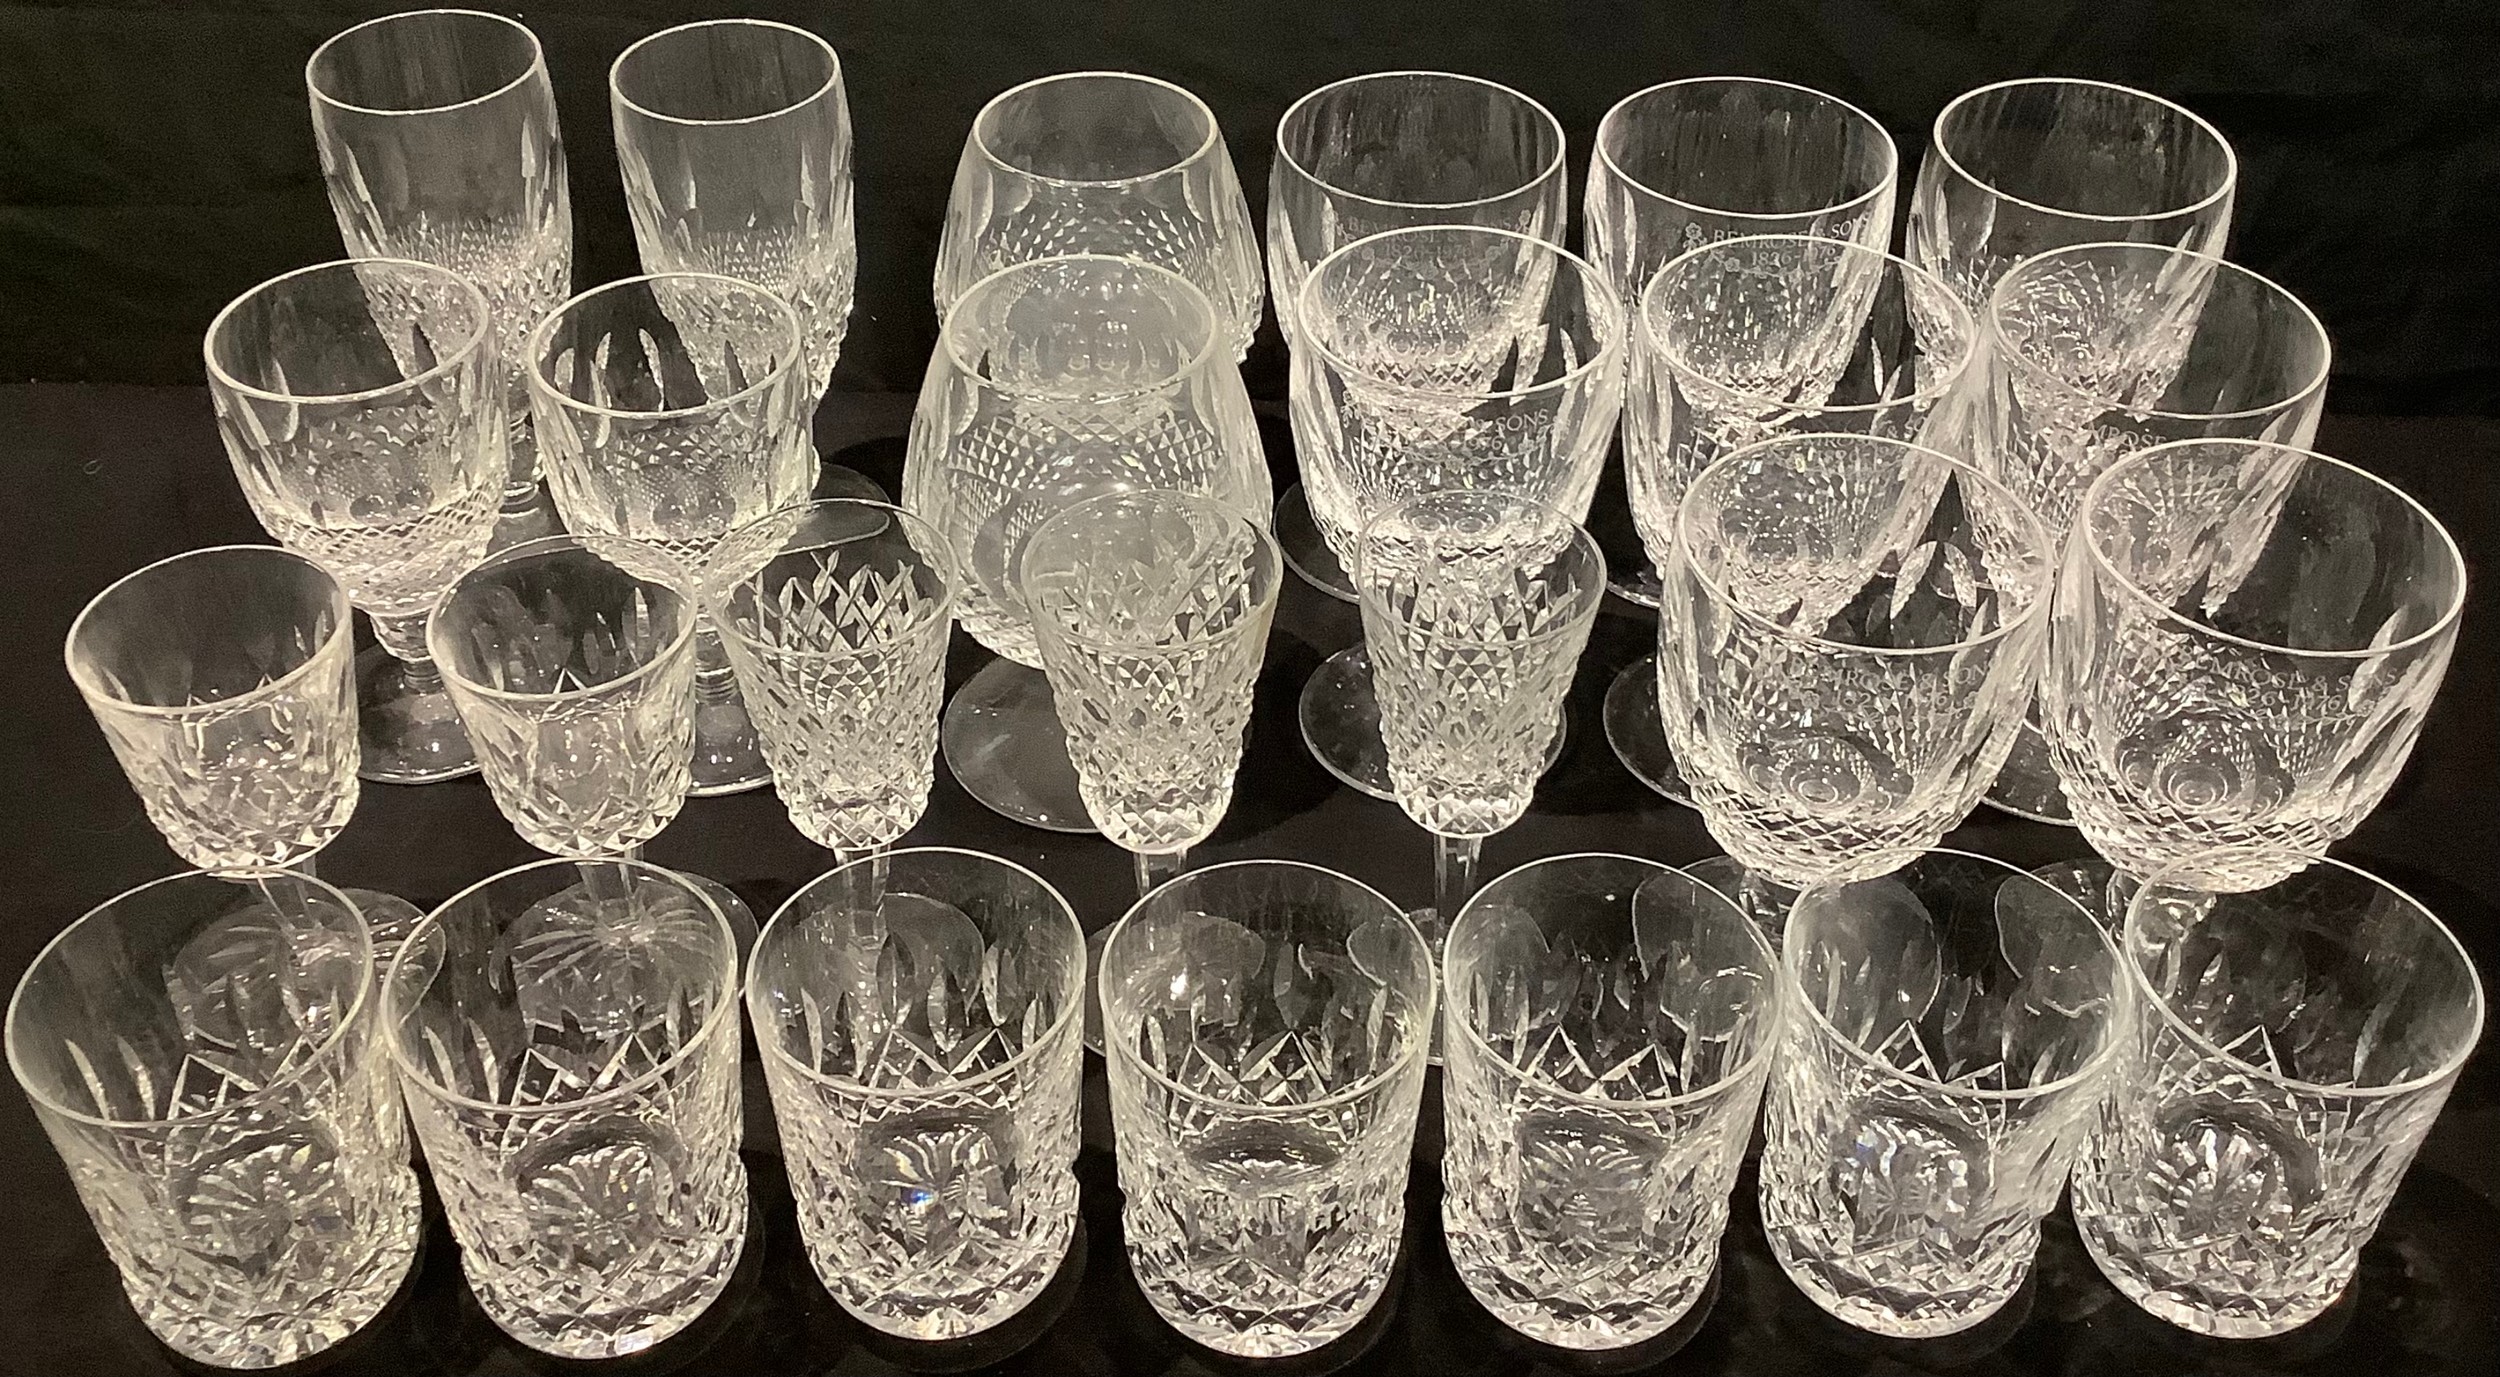 Glassware - a set of six large Waterford Crystal wine glasses, each etched Bemrose & Sons, 1826-